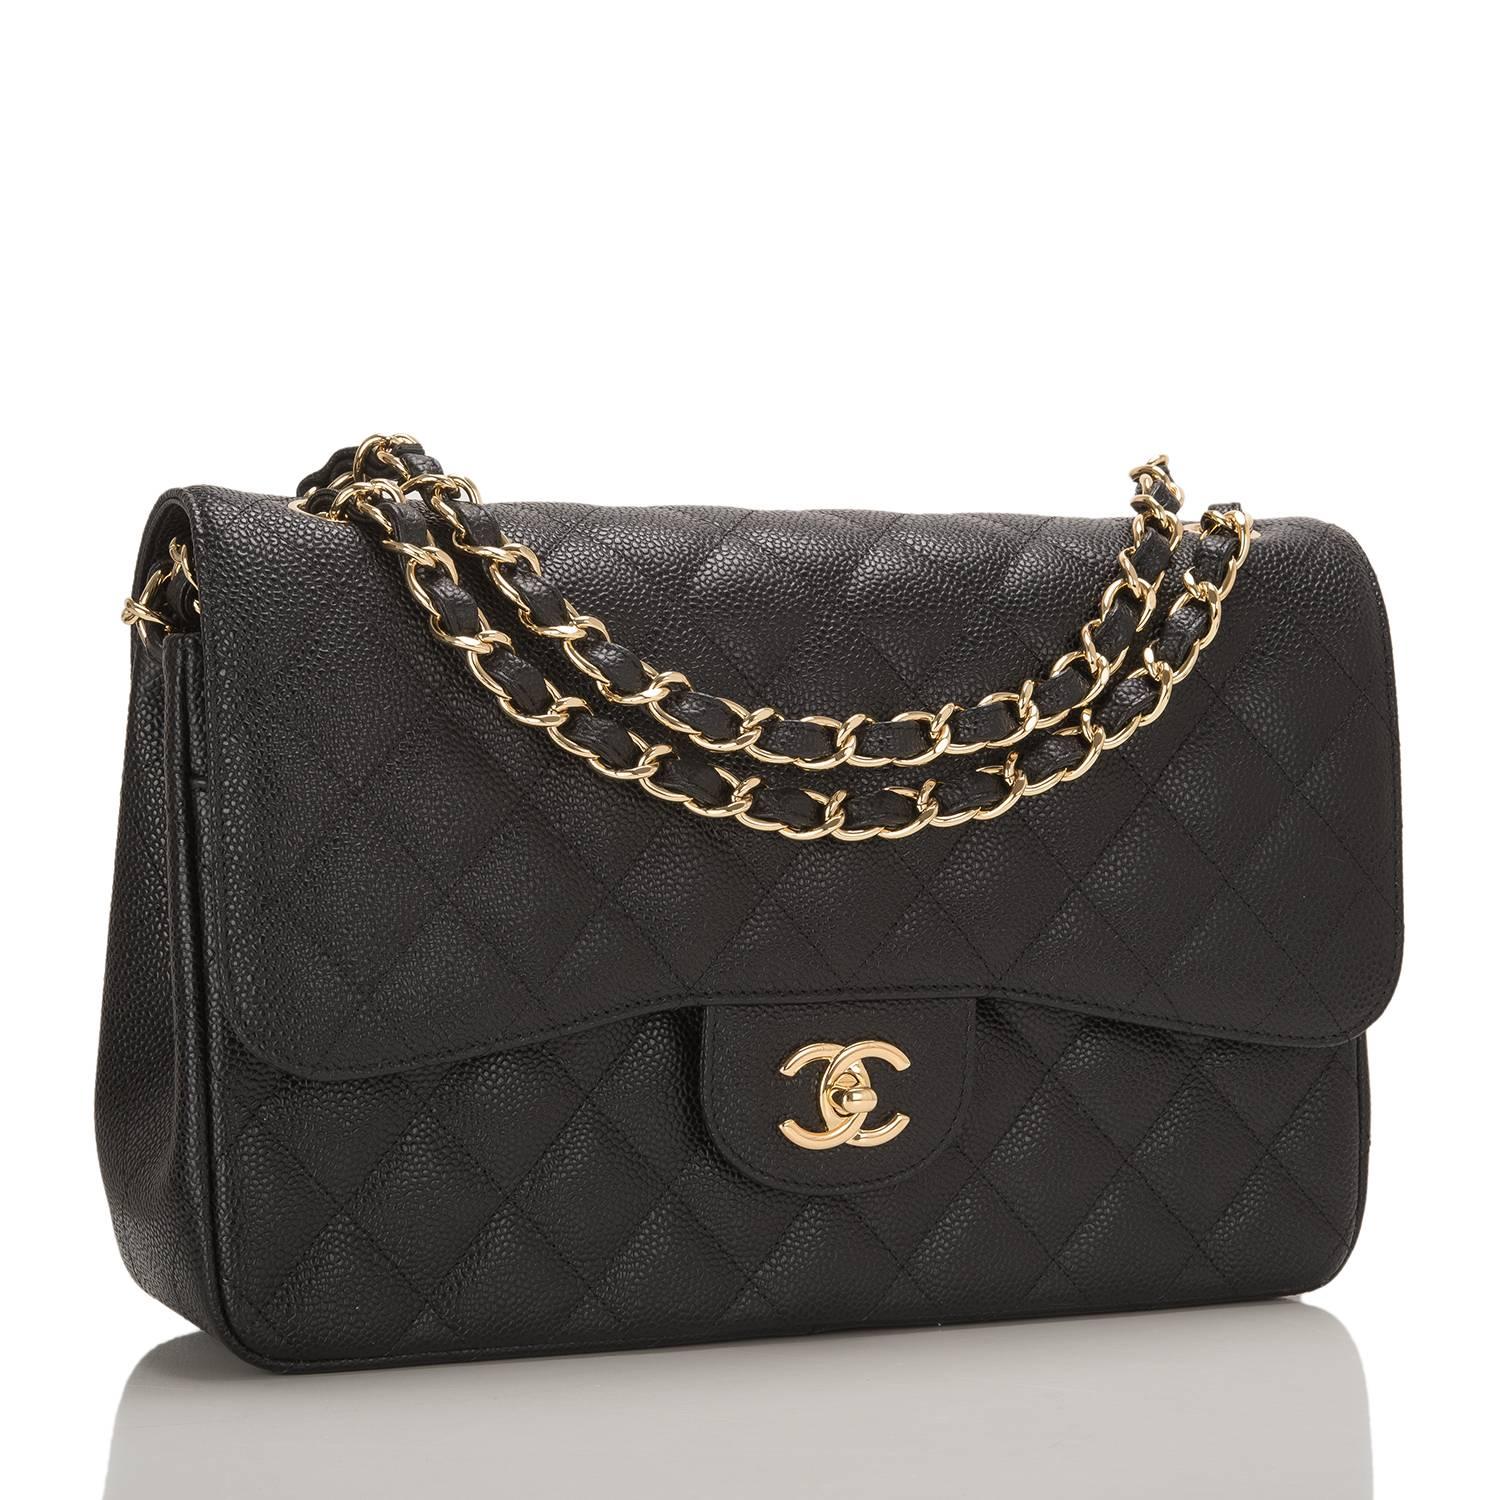 Chanel Jumbo Classic double flap bag of black caviar leather with gold hardware.

This bag features a front flap with signature CC turnlock closure, a half moon back pocket, and an adjustable interwoven gold tone chain link with black leather